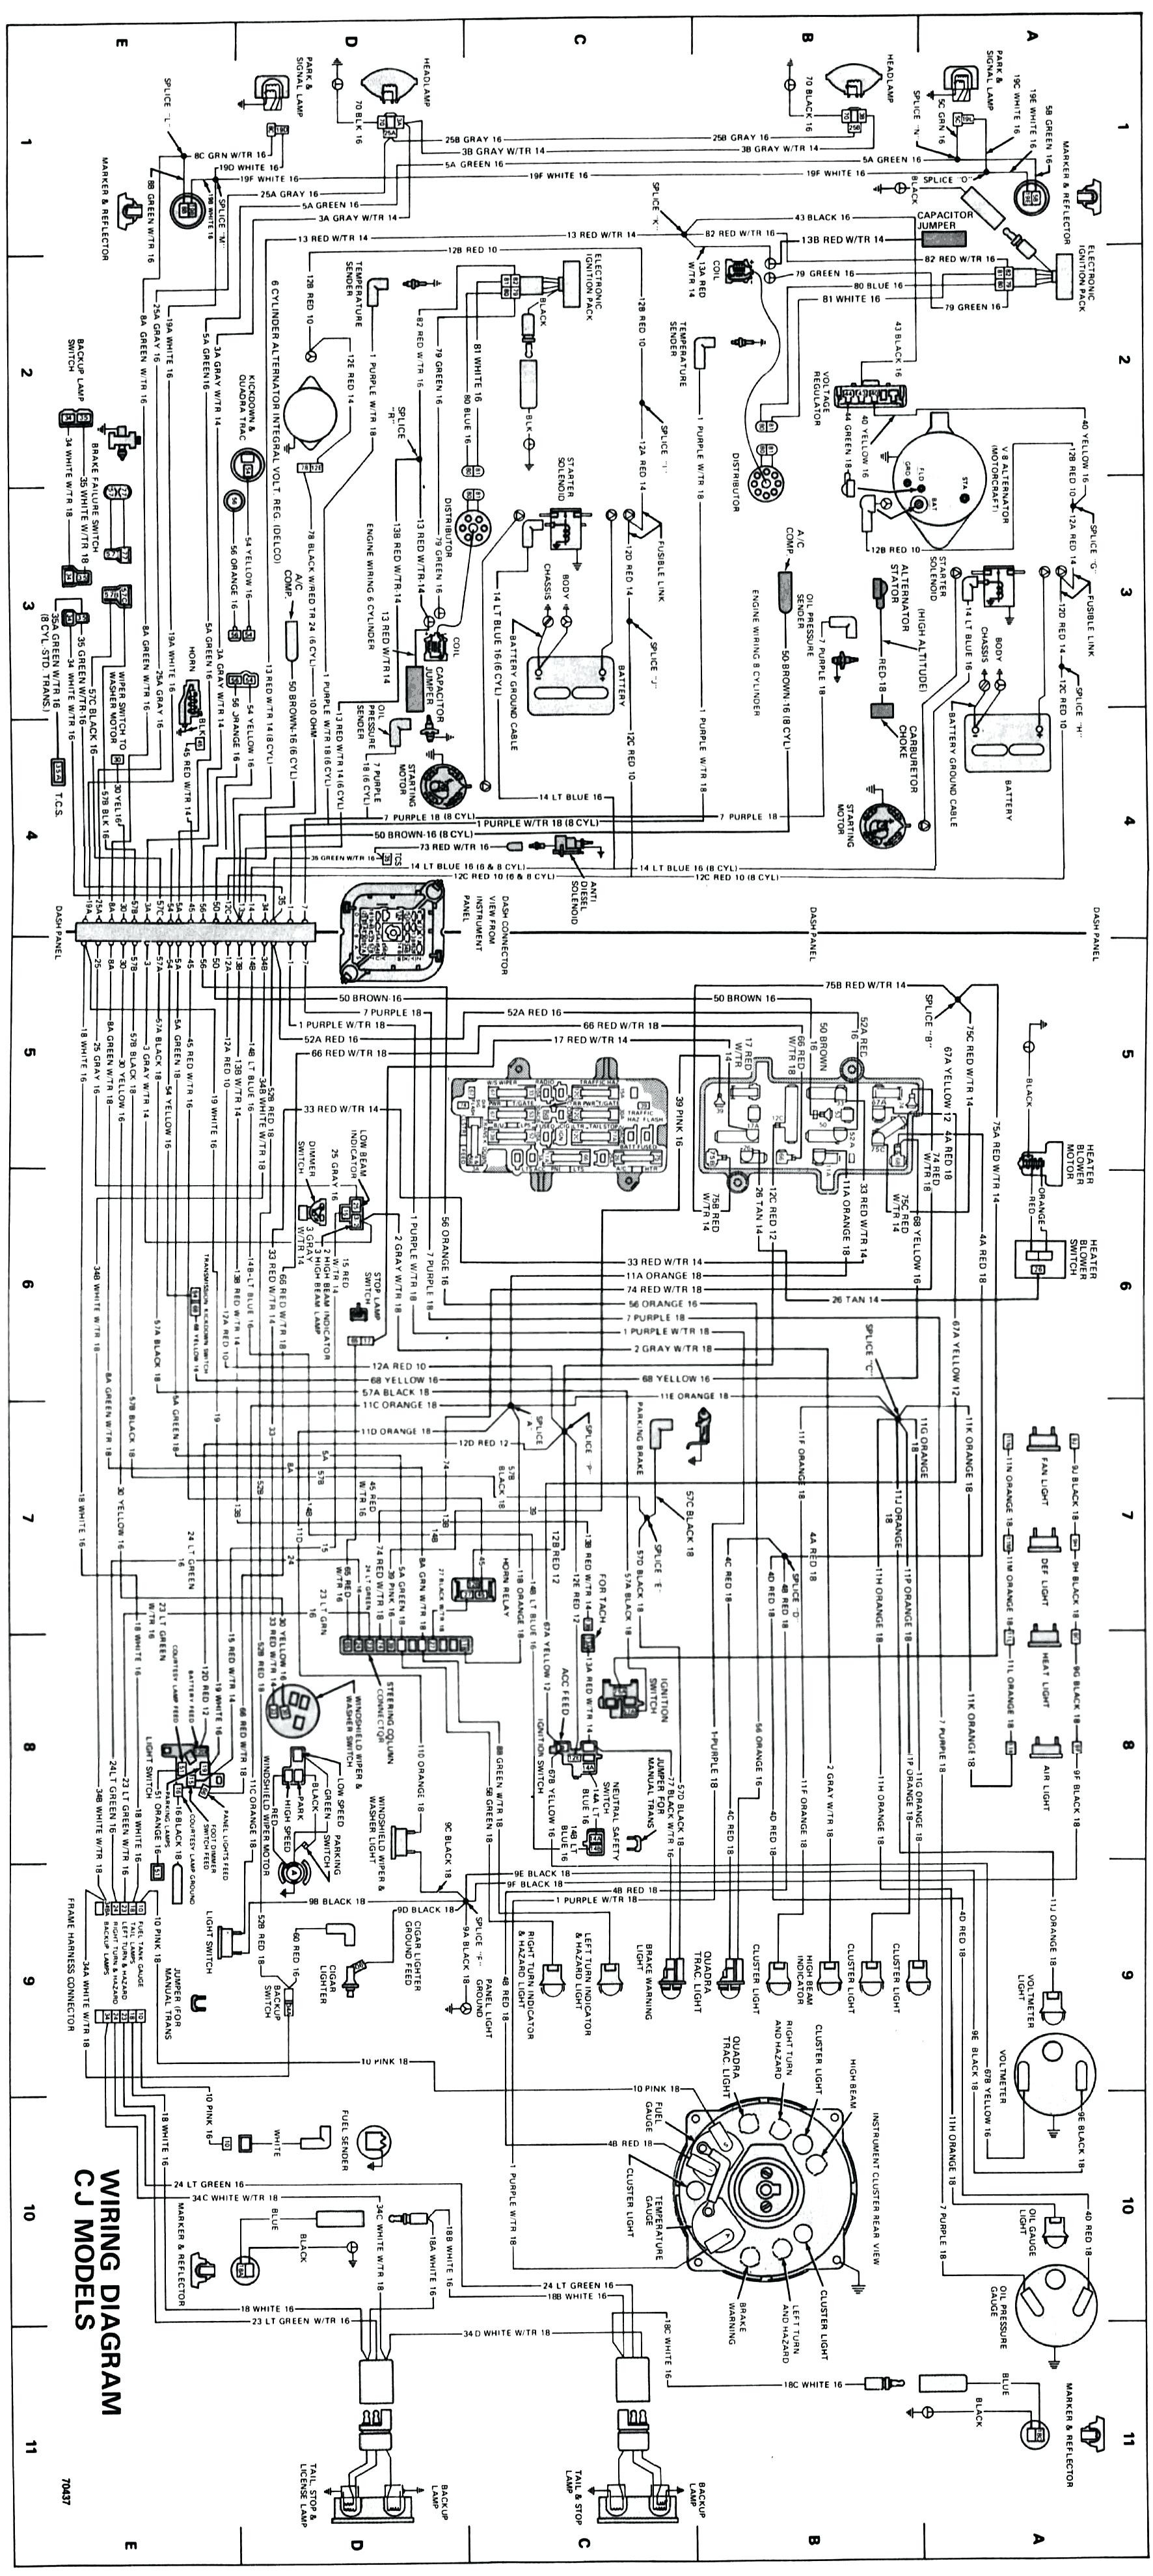 Jeep Wrangler Engine Diagram Jeep Cj7 Wiring Harness Diagram Charge Indicator Light Oil Pressure Of Jeep Wrangler Engine Diagram